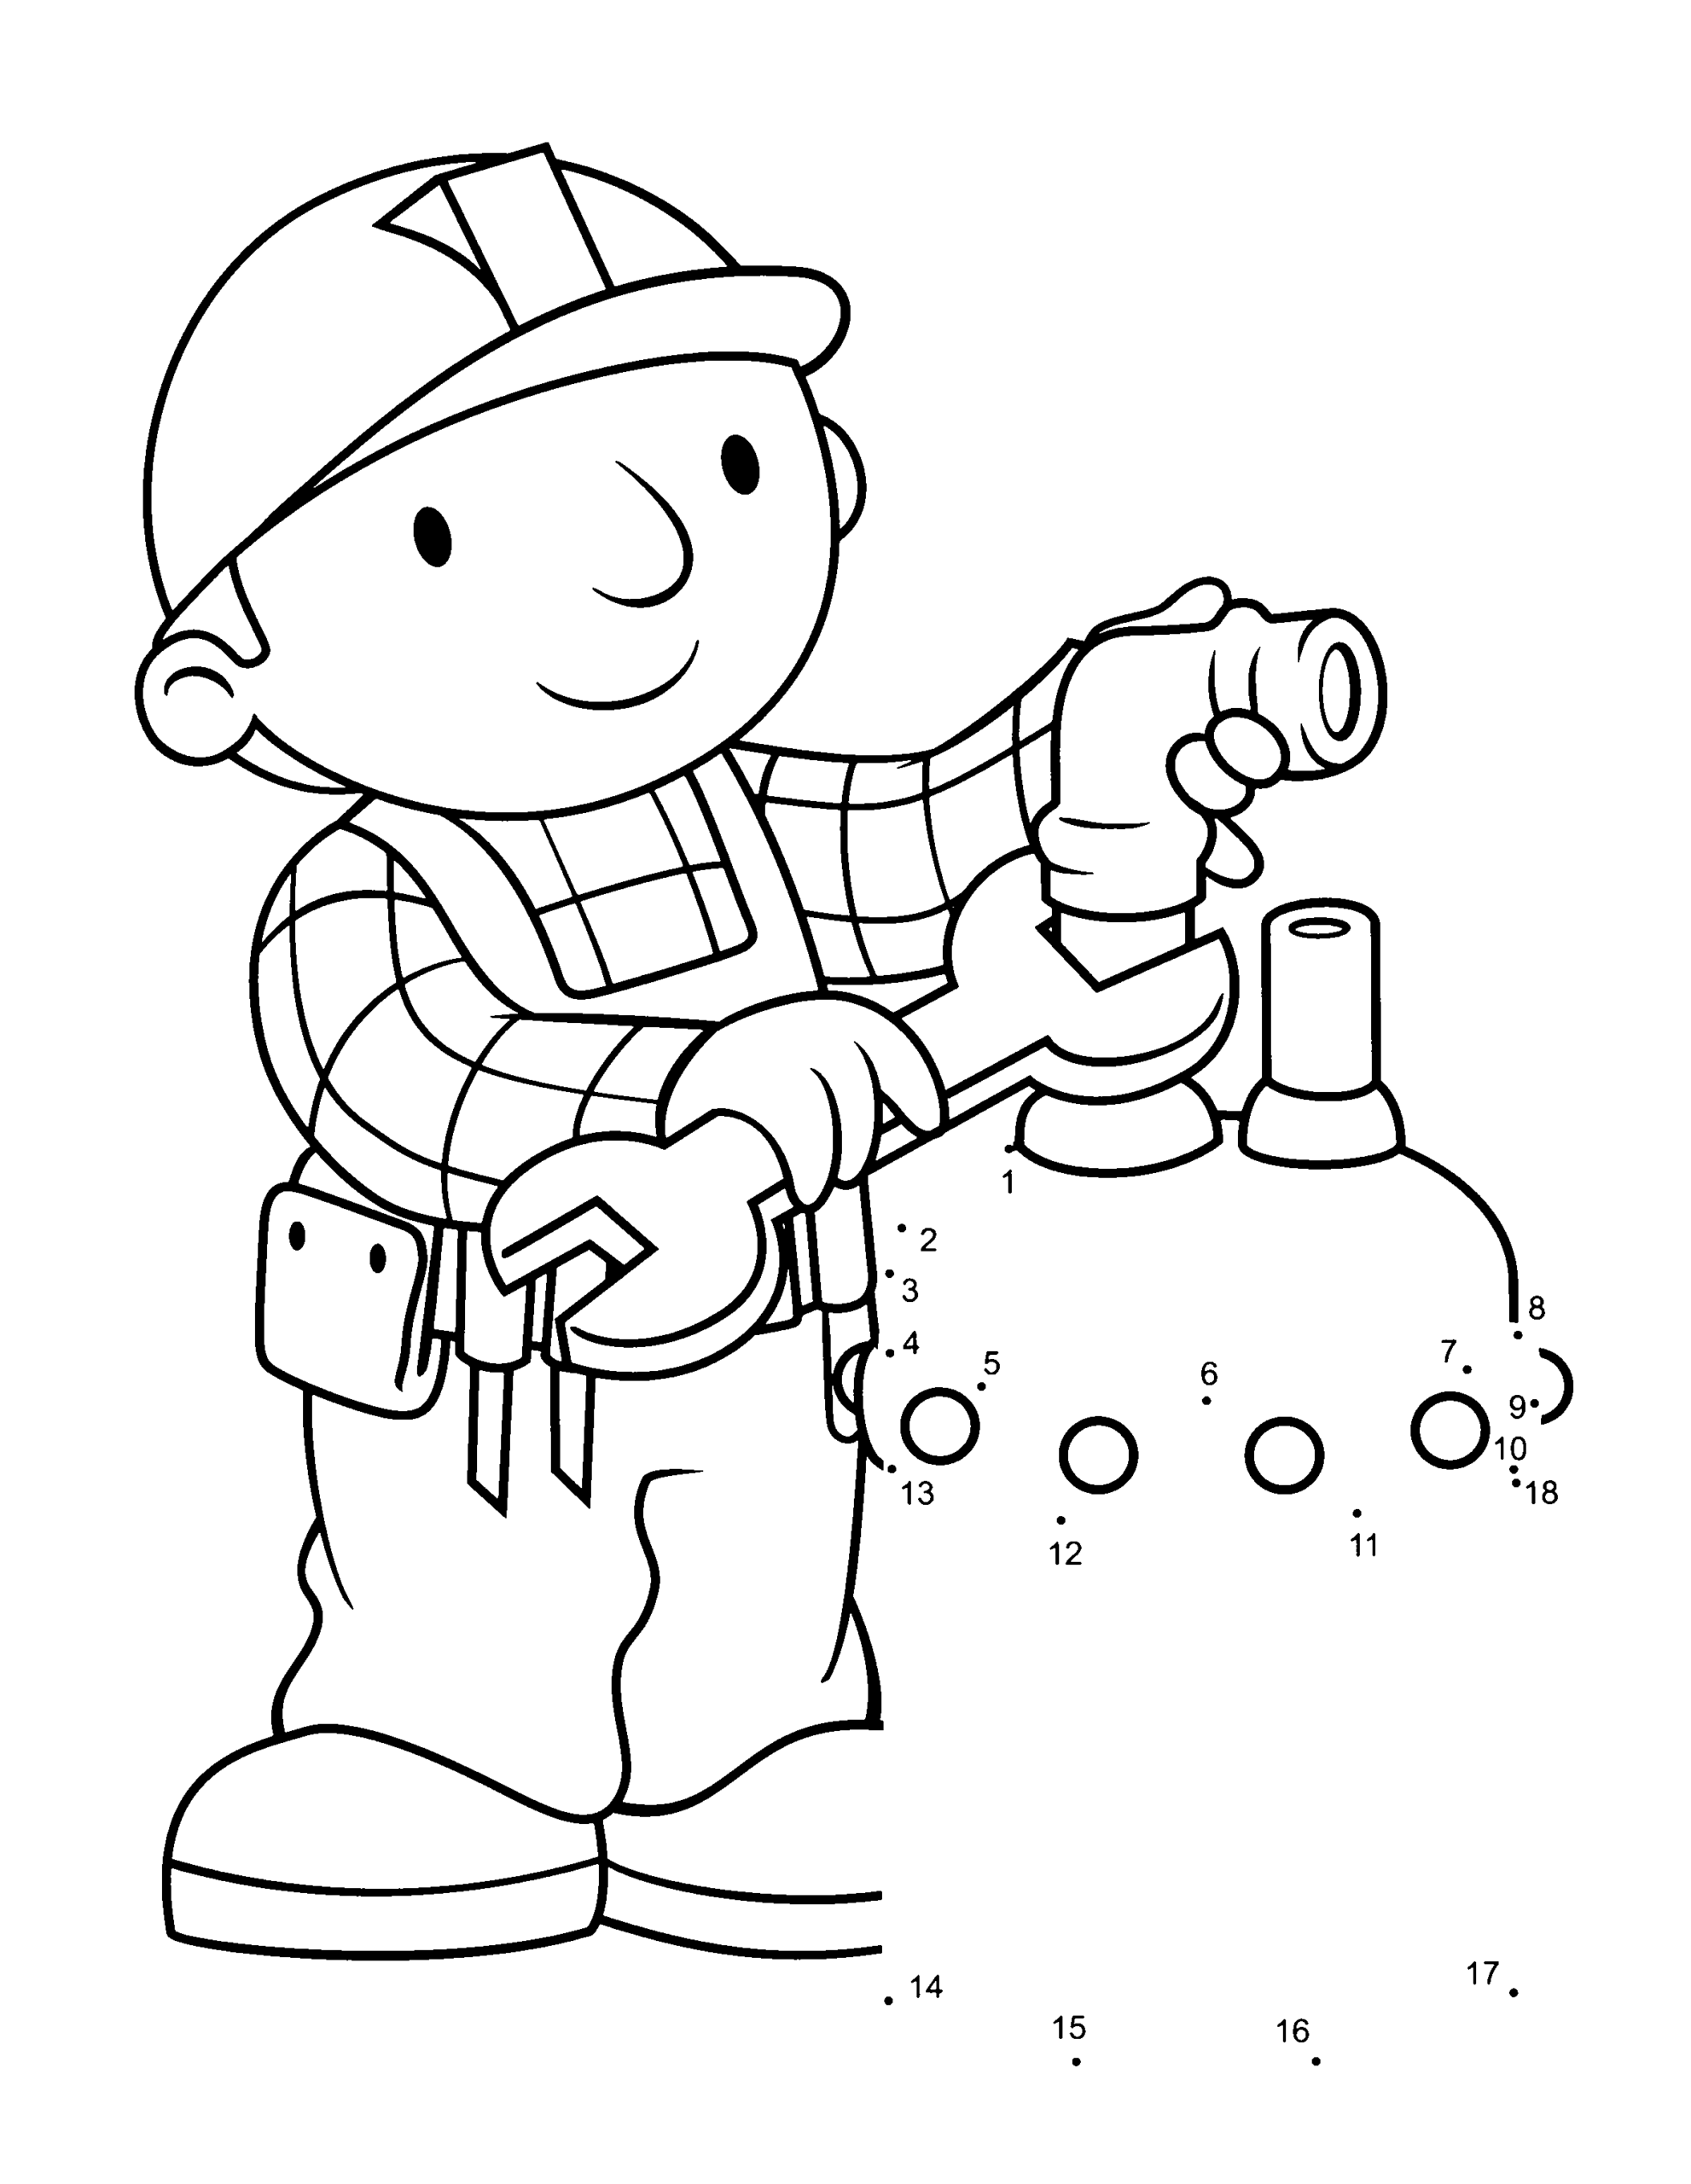 Bob the Builder Coloring Pages TV Film Bob The Builder Printable 2020 01001 Coloring4free